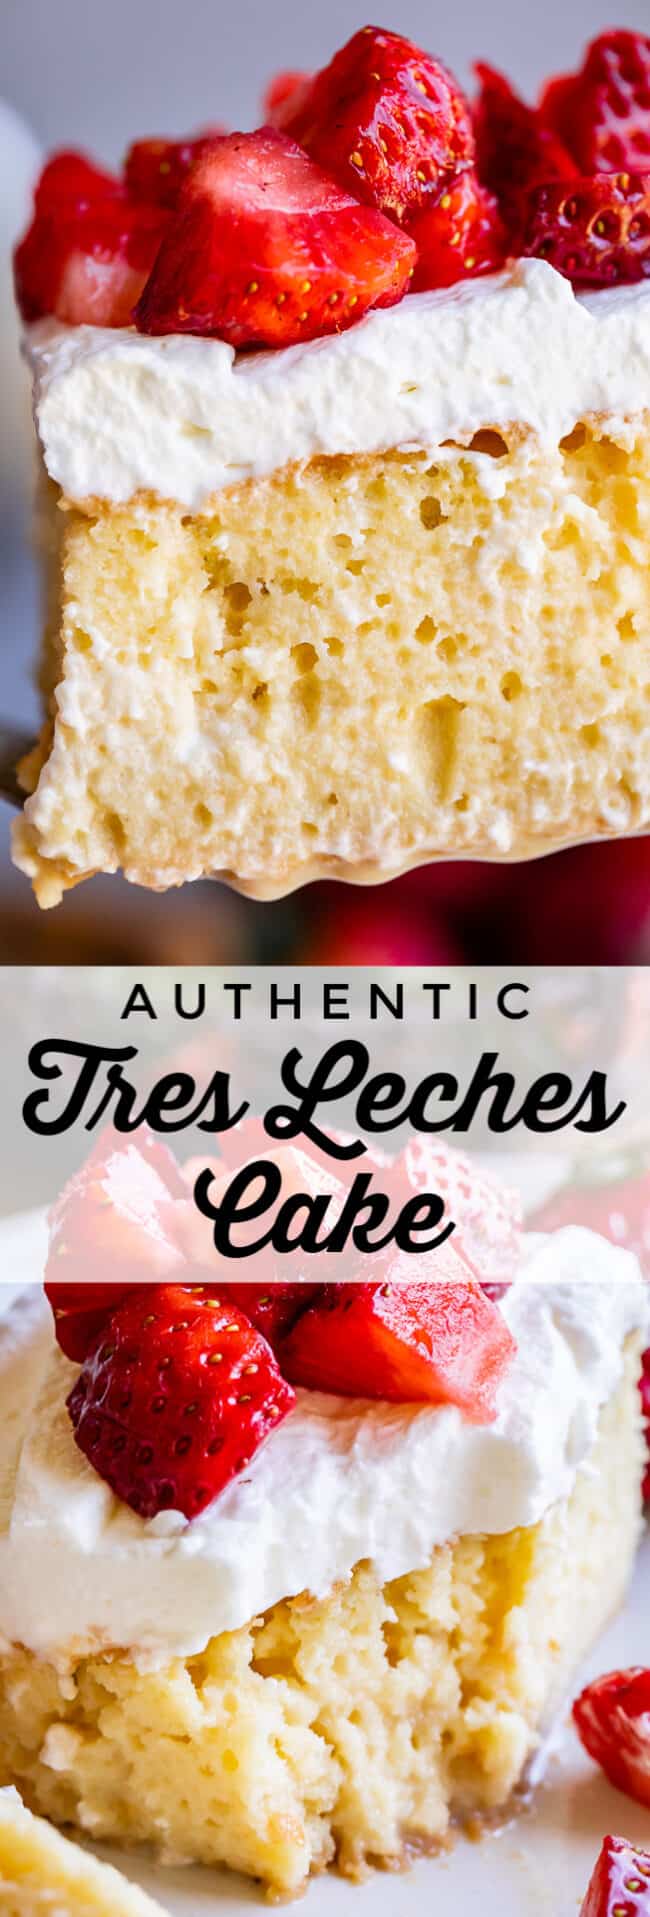 The Best Authentic Tres Leches Cake Recipe - The Food Charlatan